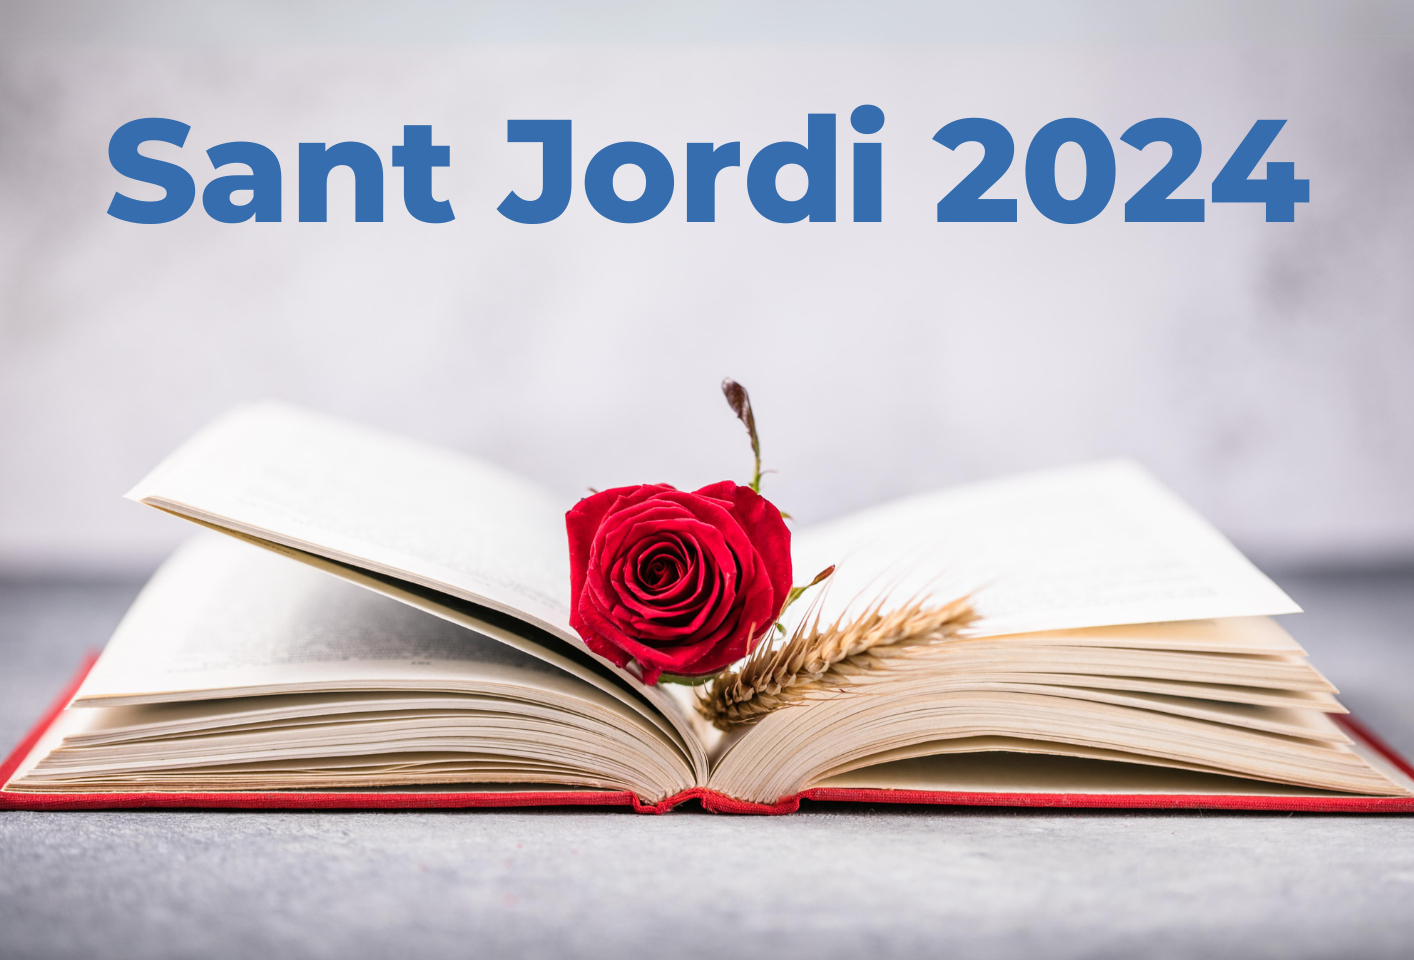 We celebrate Sant Jordi in hospitals and primary care centers